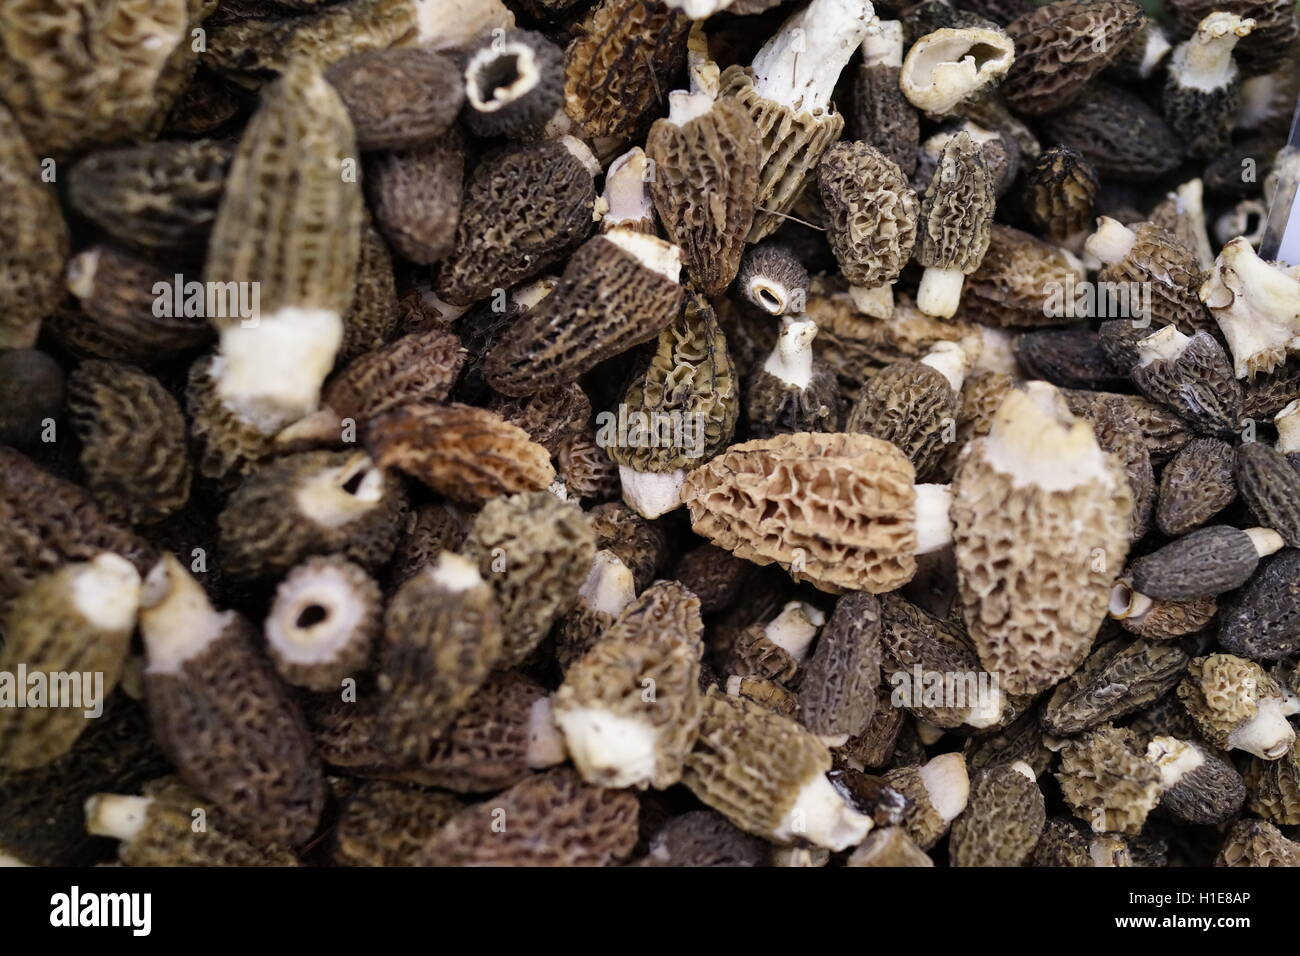 Morel mushrooms at a local farmers market in Summit, New Jersey, USA  Foraged in forests Stock Photo